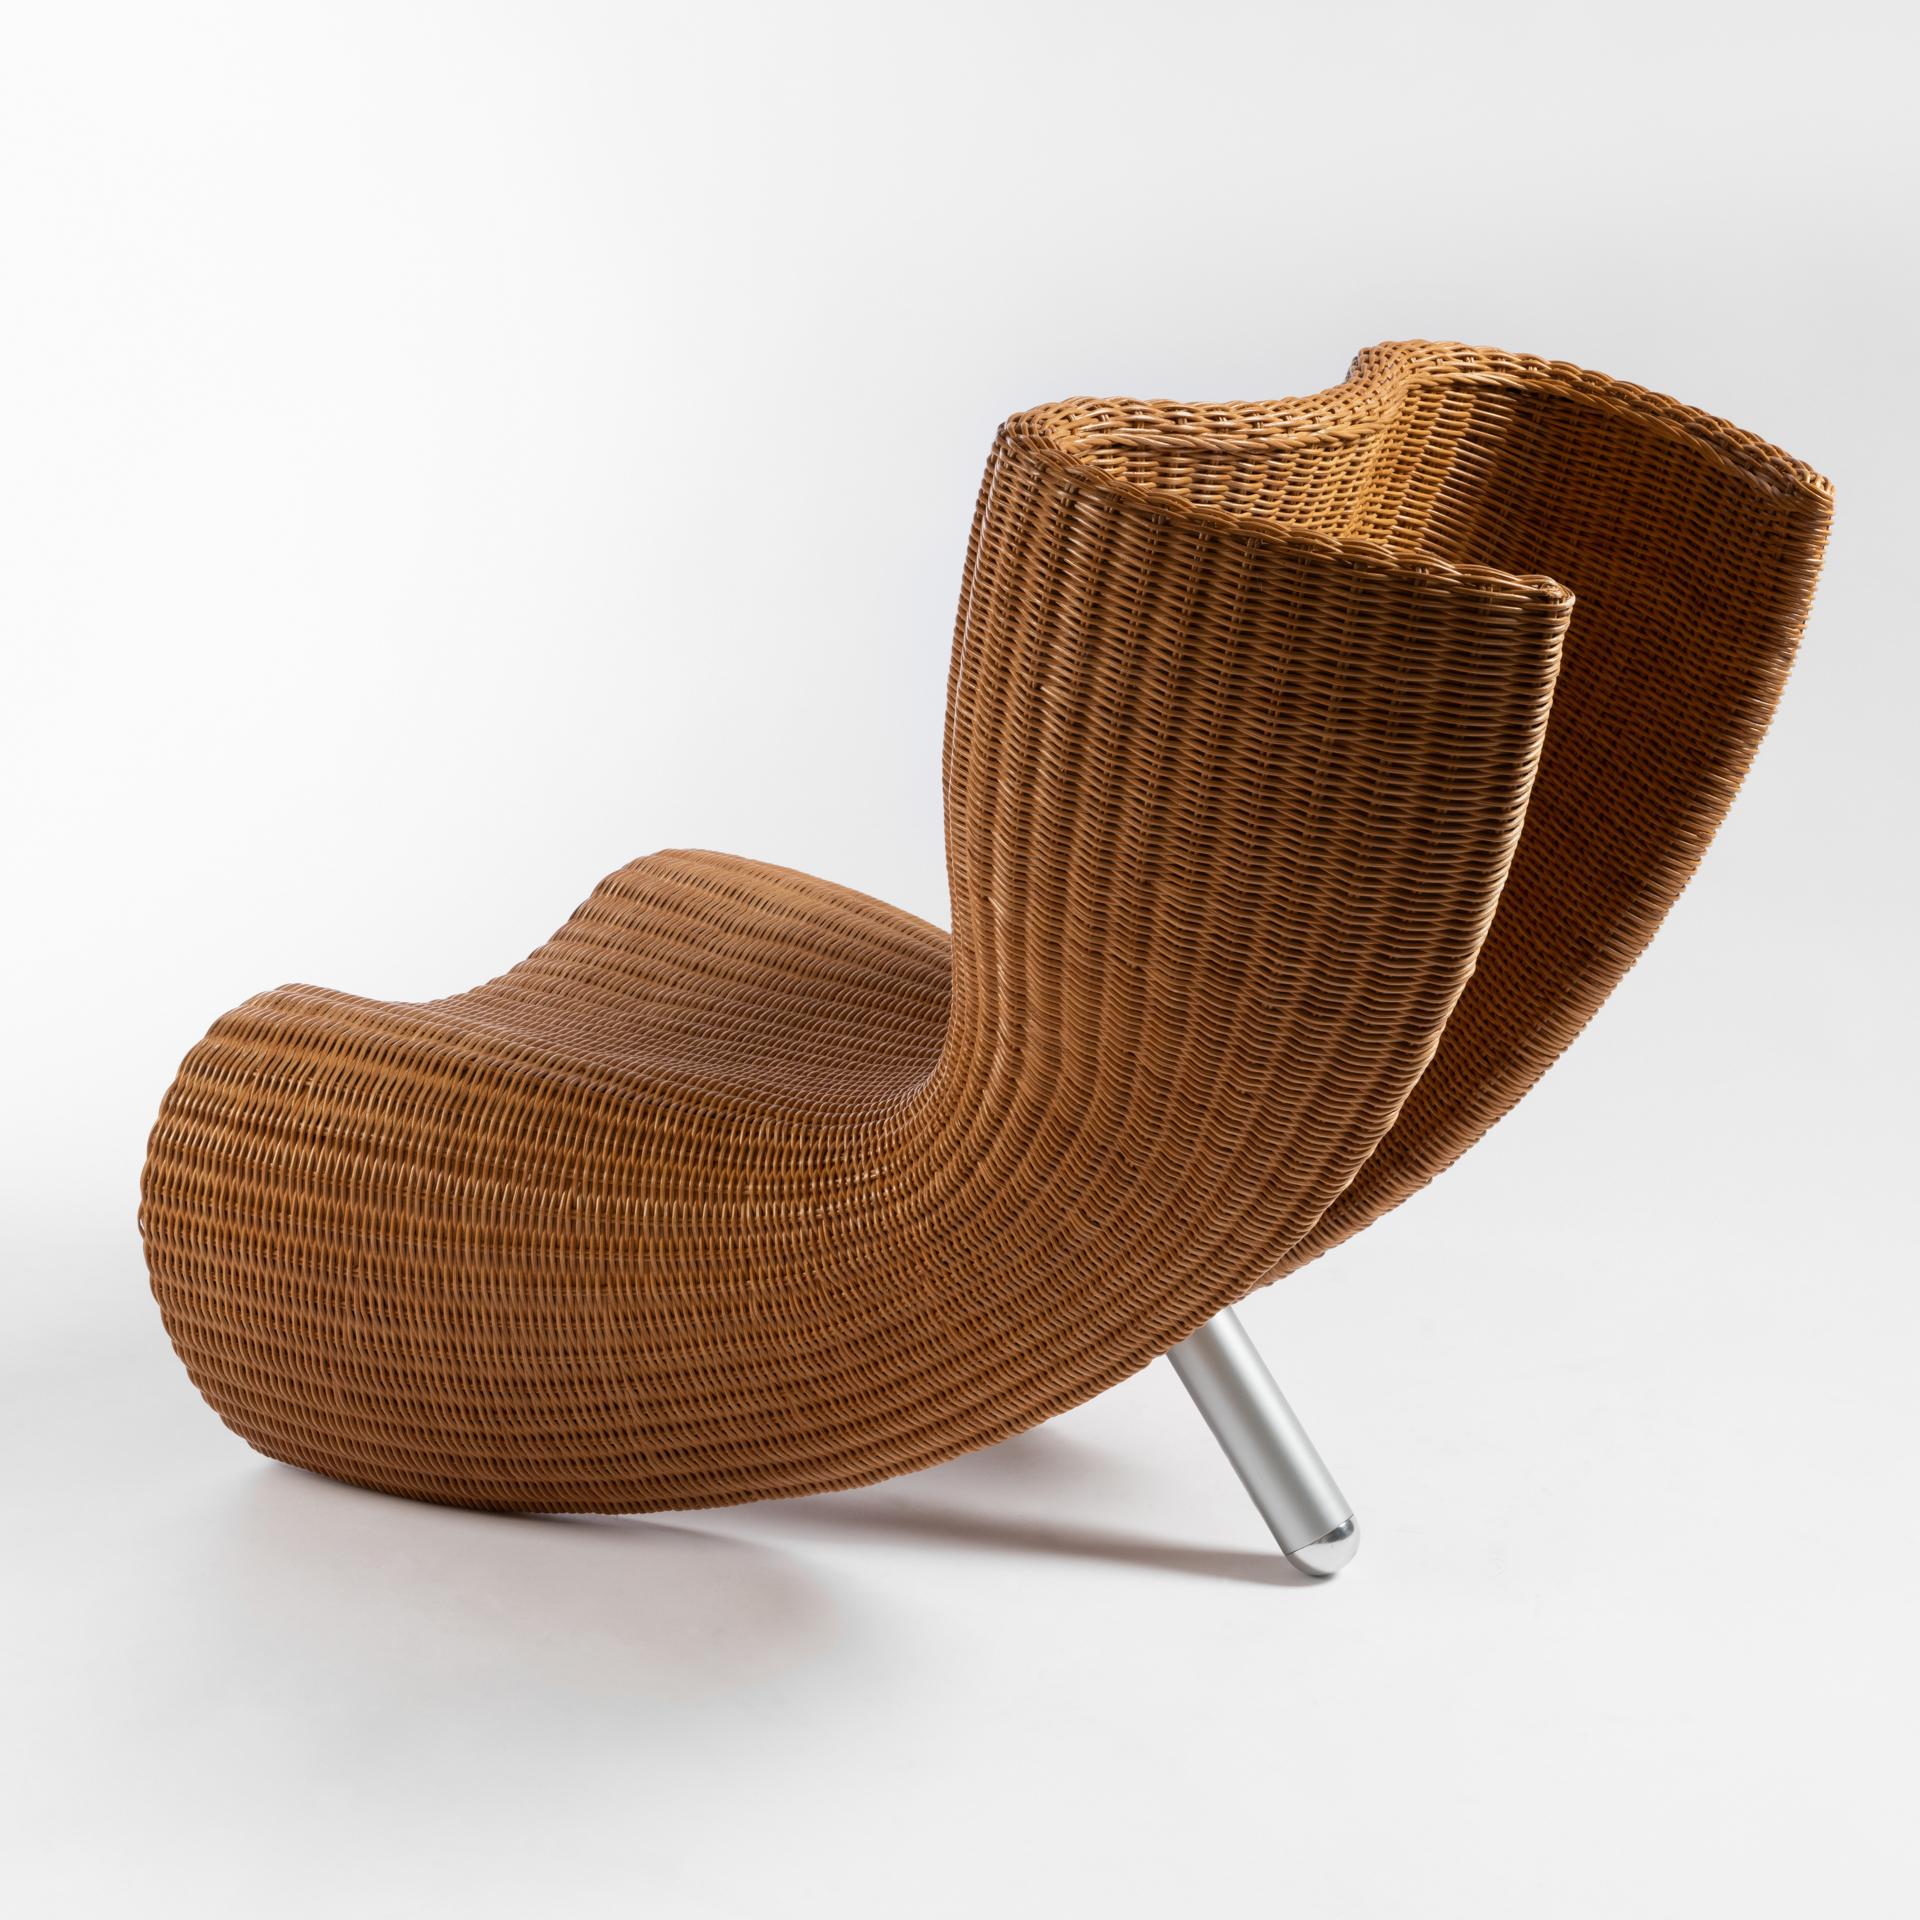 Japanese Wicker Chair by Marc Newson For Sale